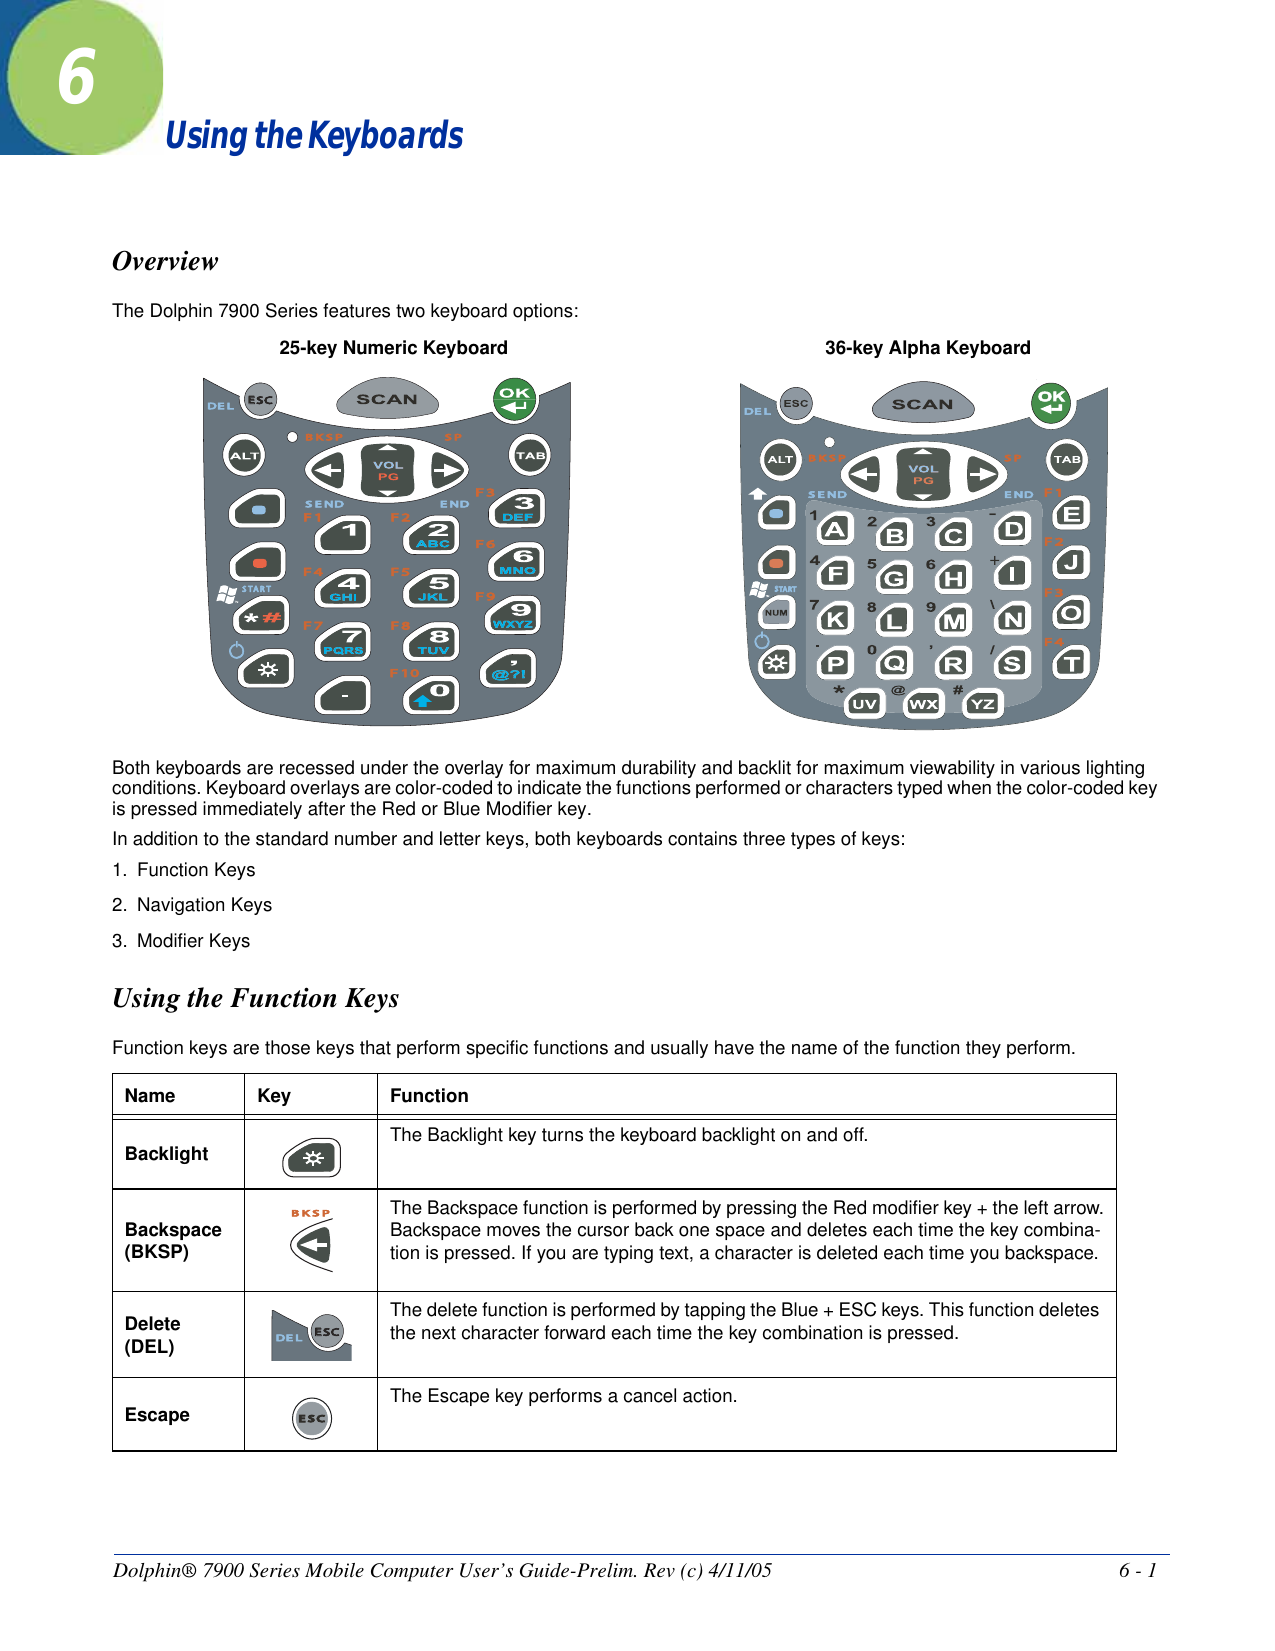 Dolphin® 7900 Series Mobile Computer User’s Guide-Prelim. Rev (c) 4/11/05 6 - 16Using the KeyboardsOverviewThe Dolphin 7900 Series features two keyboard options: Both keyboards are recessed under the overlay for maximum durability and backlit for maximum viewability in various lighting conditions. Keyboard overlays are color-coded to indicate the functions performed or characters typed when the color-coded key is pressed immediately after the Red or Blue Modifier key. In addition to the standard number and letter keys, both keyboards contains three types of keys:1. Function Keys2. Navigation Keys 3. Modifier KeysUsing the Function KeysFunction keys are those keys that perform specific functions and usually have the name of the function they perform.Name Key FunctionBacklight  The Backlight key turns the keyboard backlight on and off.Backspace (BKSP)The Backspace function is performed by pressing the Red modifier key + the left arrow.Backspace moves the cursor back one space and deletes each time the key combina-tion is pressed. If you are typing text, a character is deleted each time you backspace.Delete (DEL)The delete function is performed by tapping the Blue + ESC keys. This function deletes the next character forward each time the key combination is pressed.Escape The Escape key performs a cancel action.EESCF 1F 2F 3F 4 F 5F 6F 7 F 8F 9F 10S T A R TB K S P S PS E ND E NDDE LSSTART+-B K S P S PS E ND E NDF 1F 2F 3F 4DE L25-key Numeric Keyboard 36-key Alpha KeyboardB K S PEESCDE LE S C